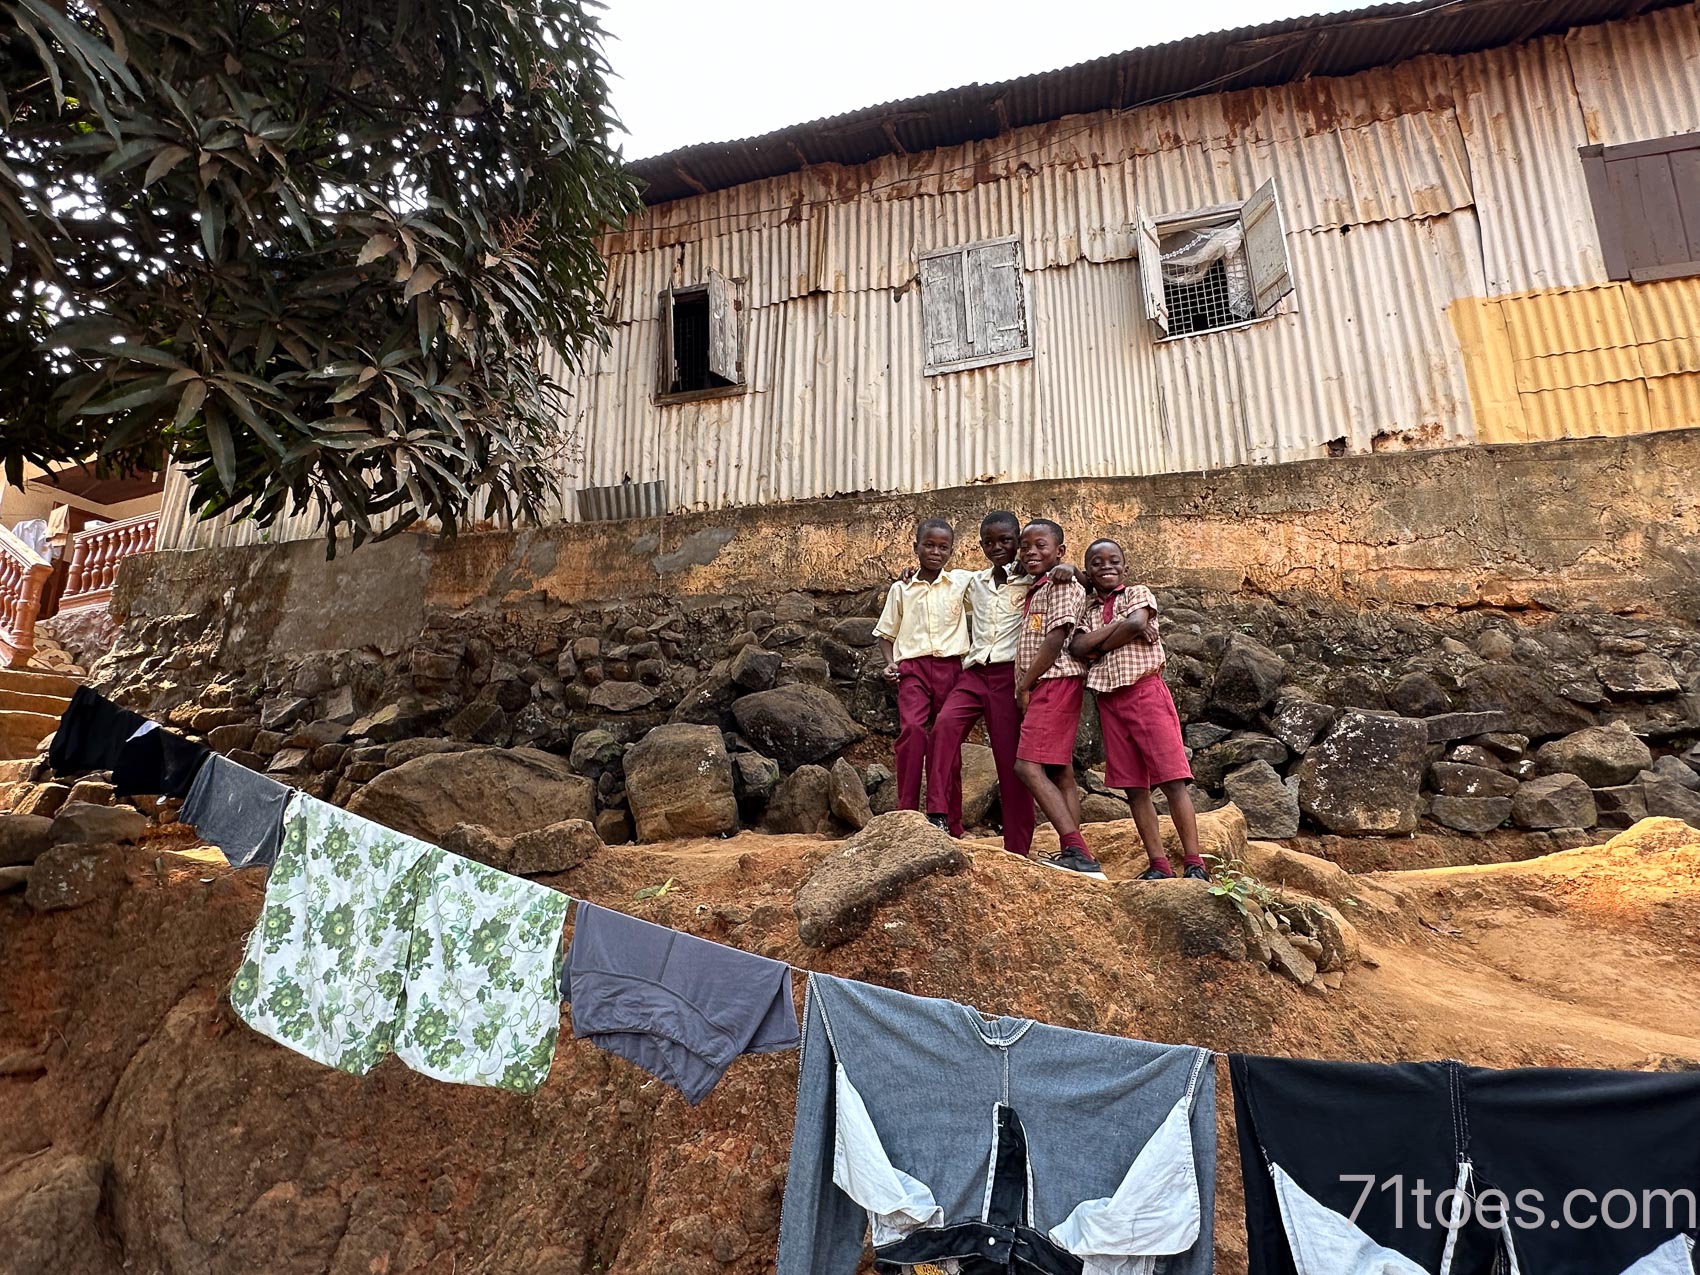 how two families found light in the “wilderness” — Sierra Leone